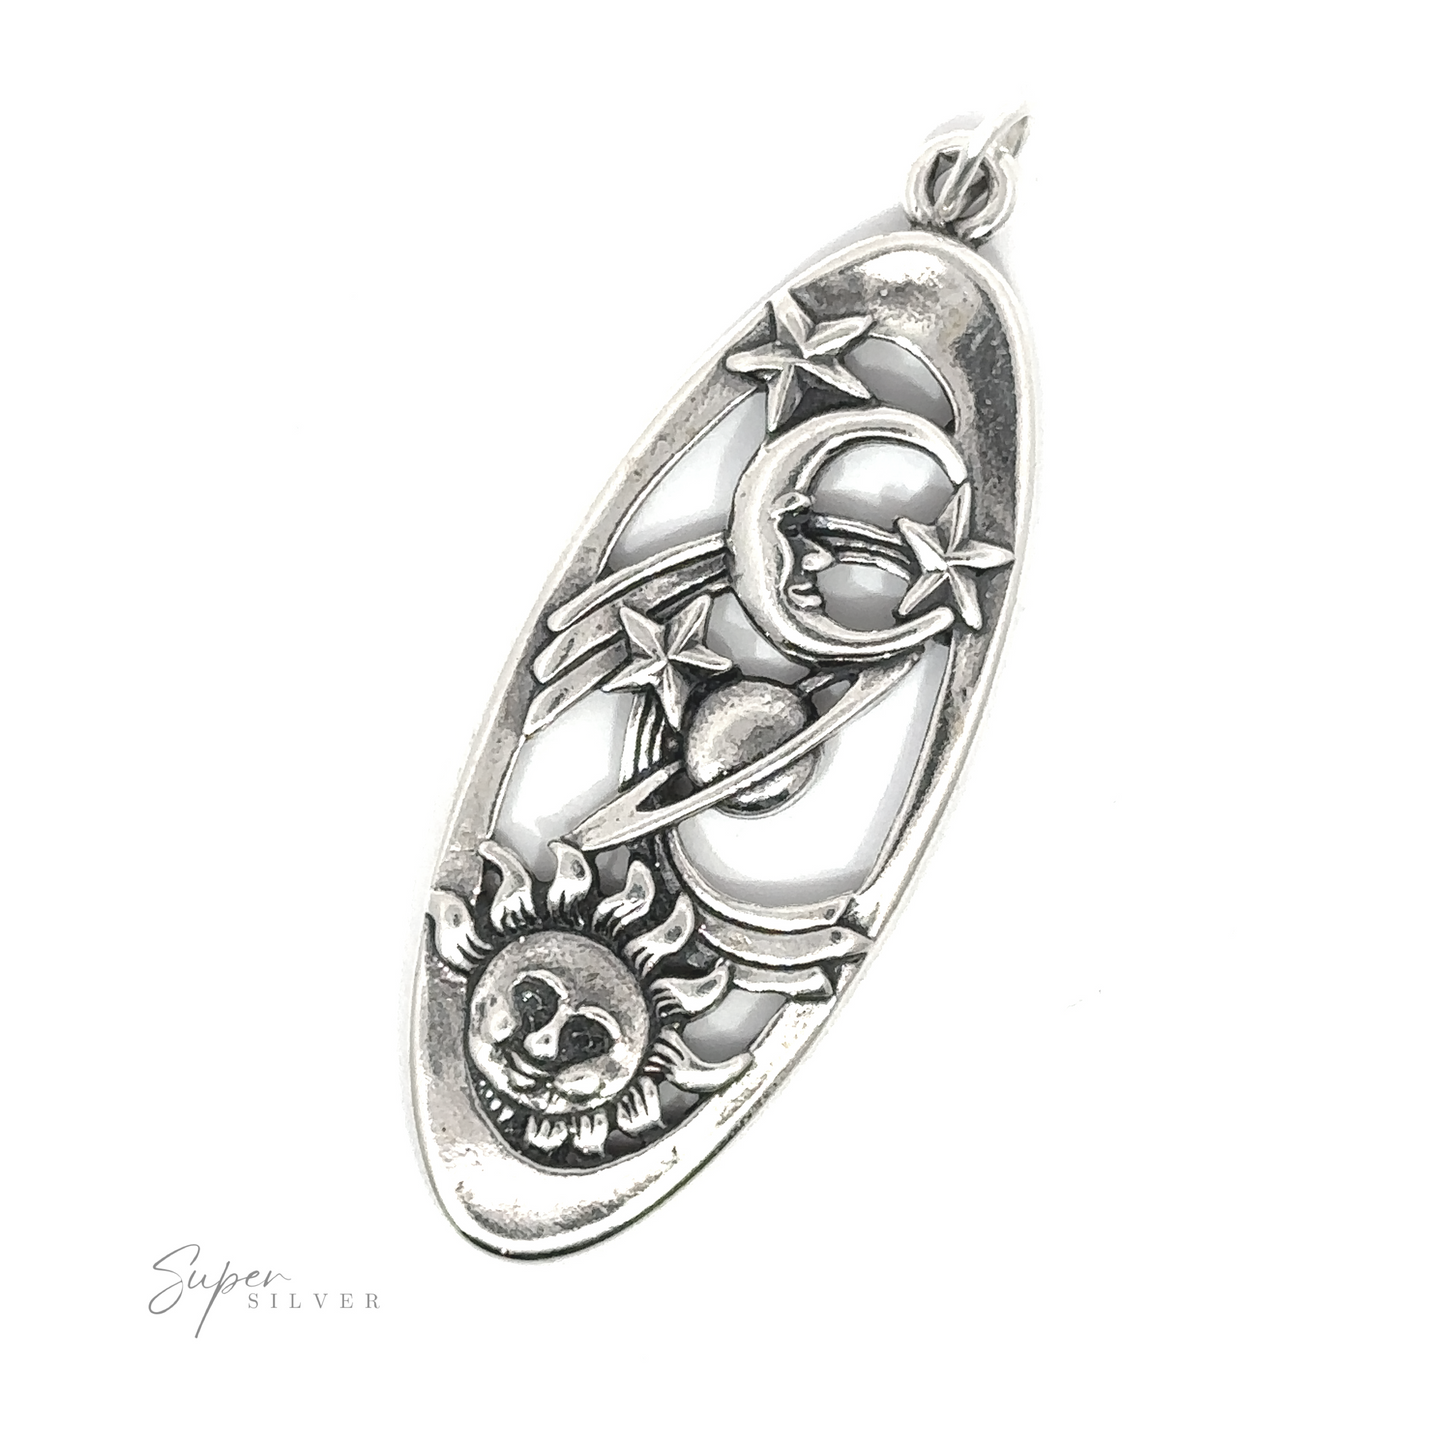 This Statement Space Pendant is crafted from .925 Sterling Silver and features a stunning design of a sun, moon, and stars.